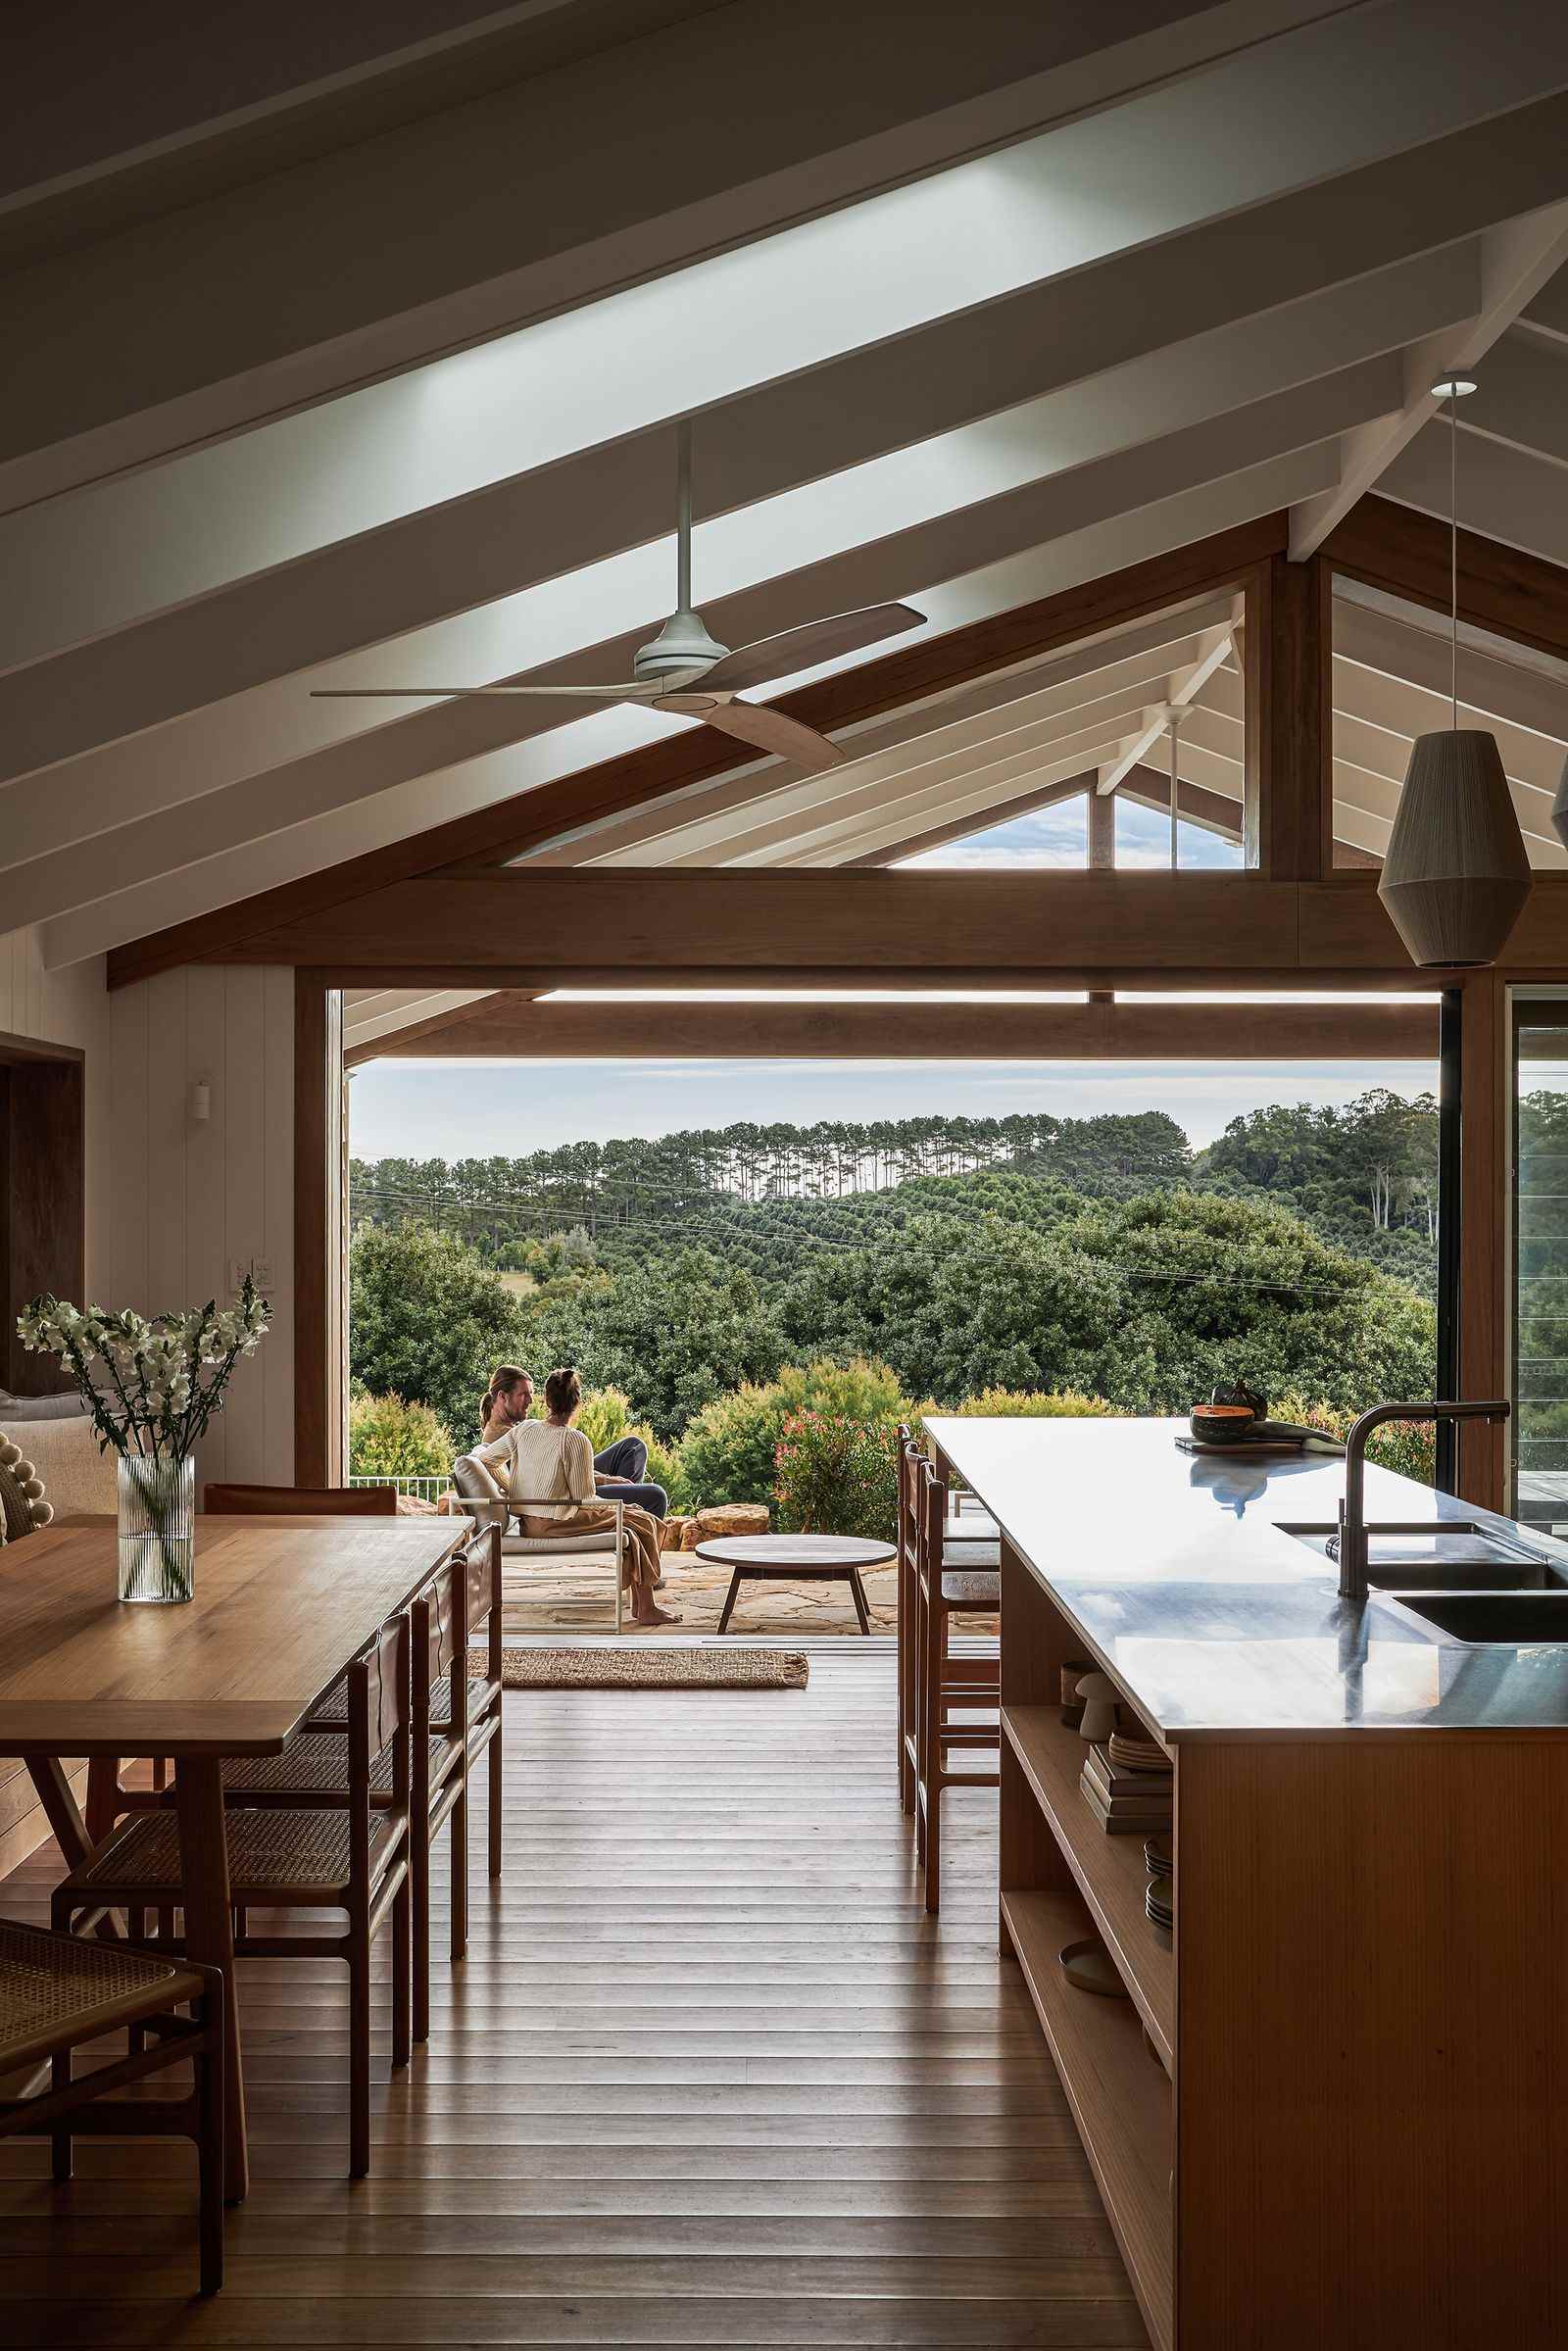 The Caretaker's by Aphora Architecture showing an interior view of the kitchen / dining space looking out to the hinterland